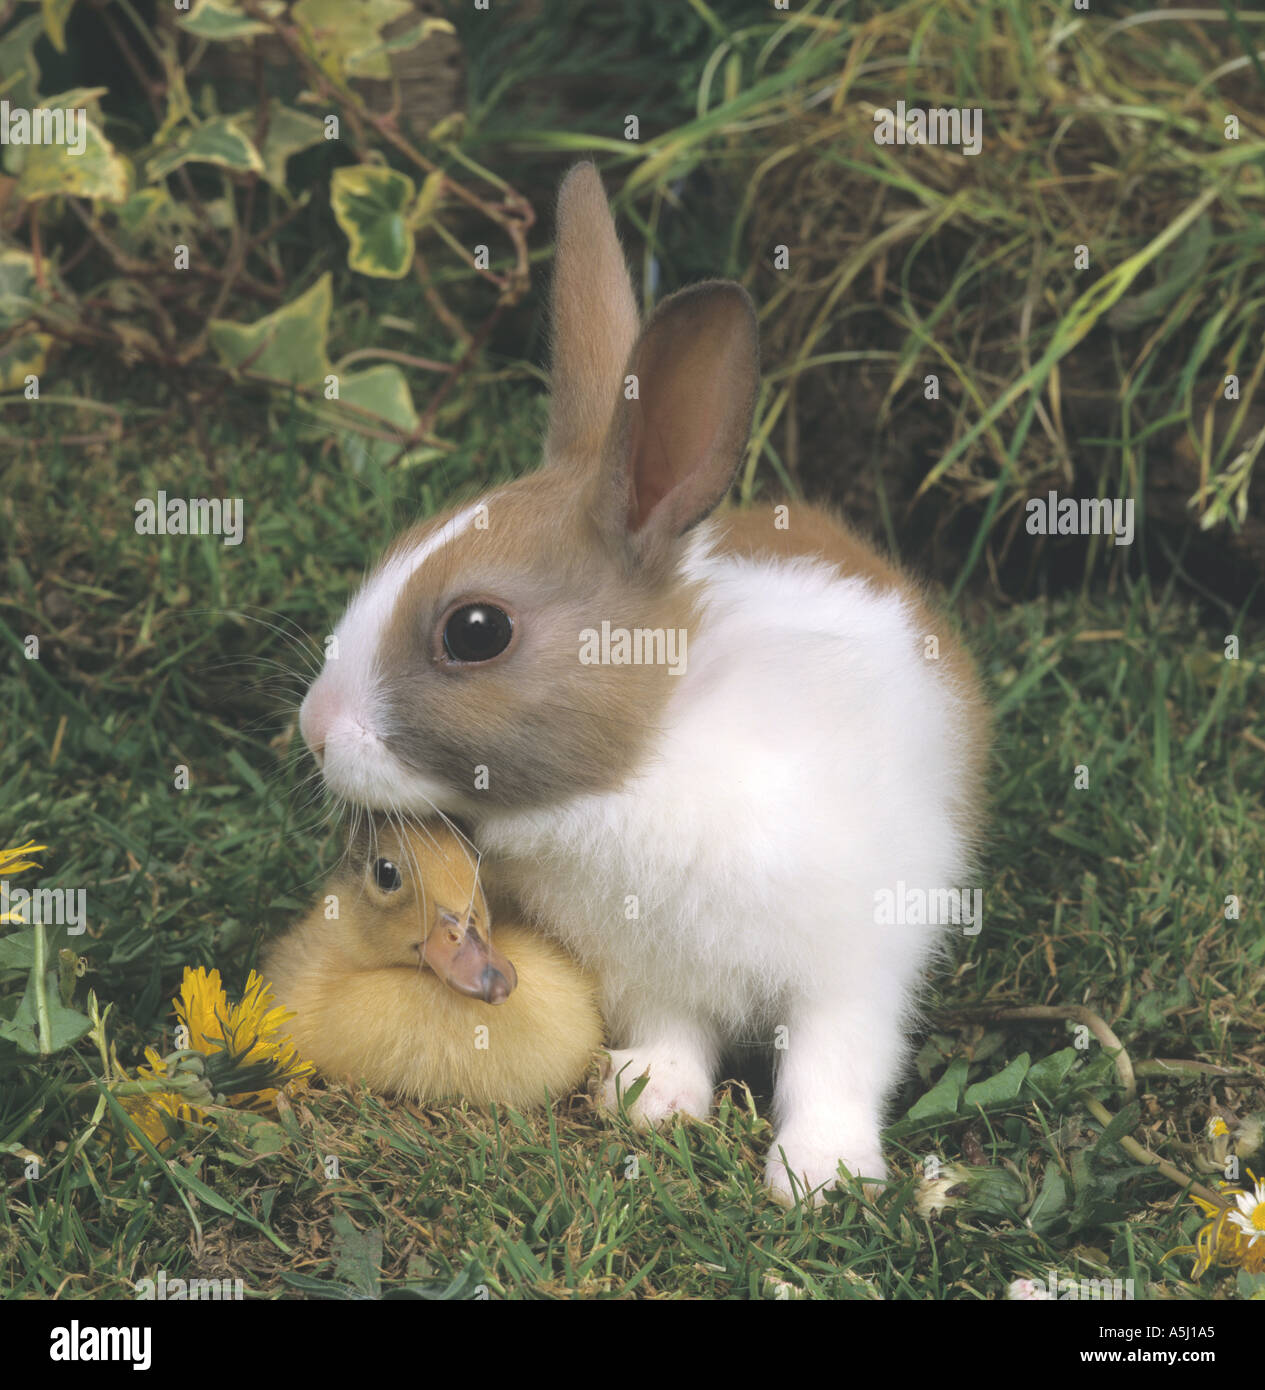 Duckling with Young Dutch Rabbits Stock Photo